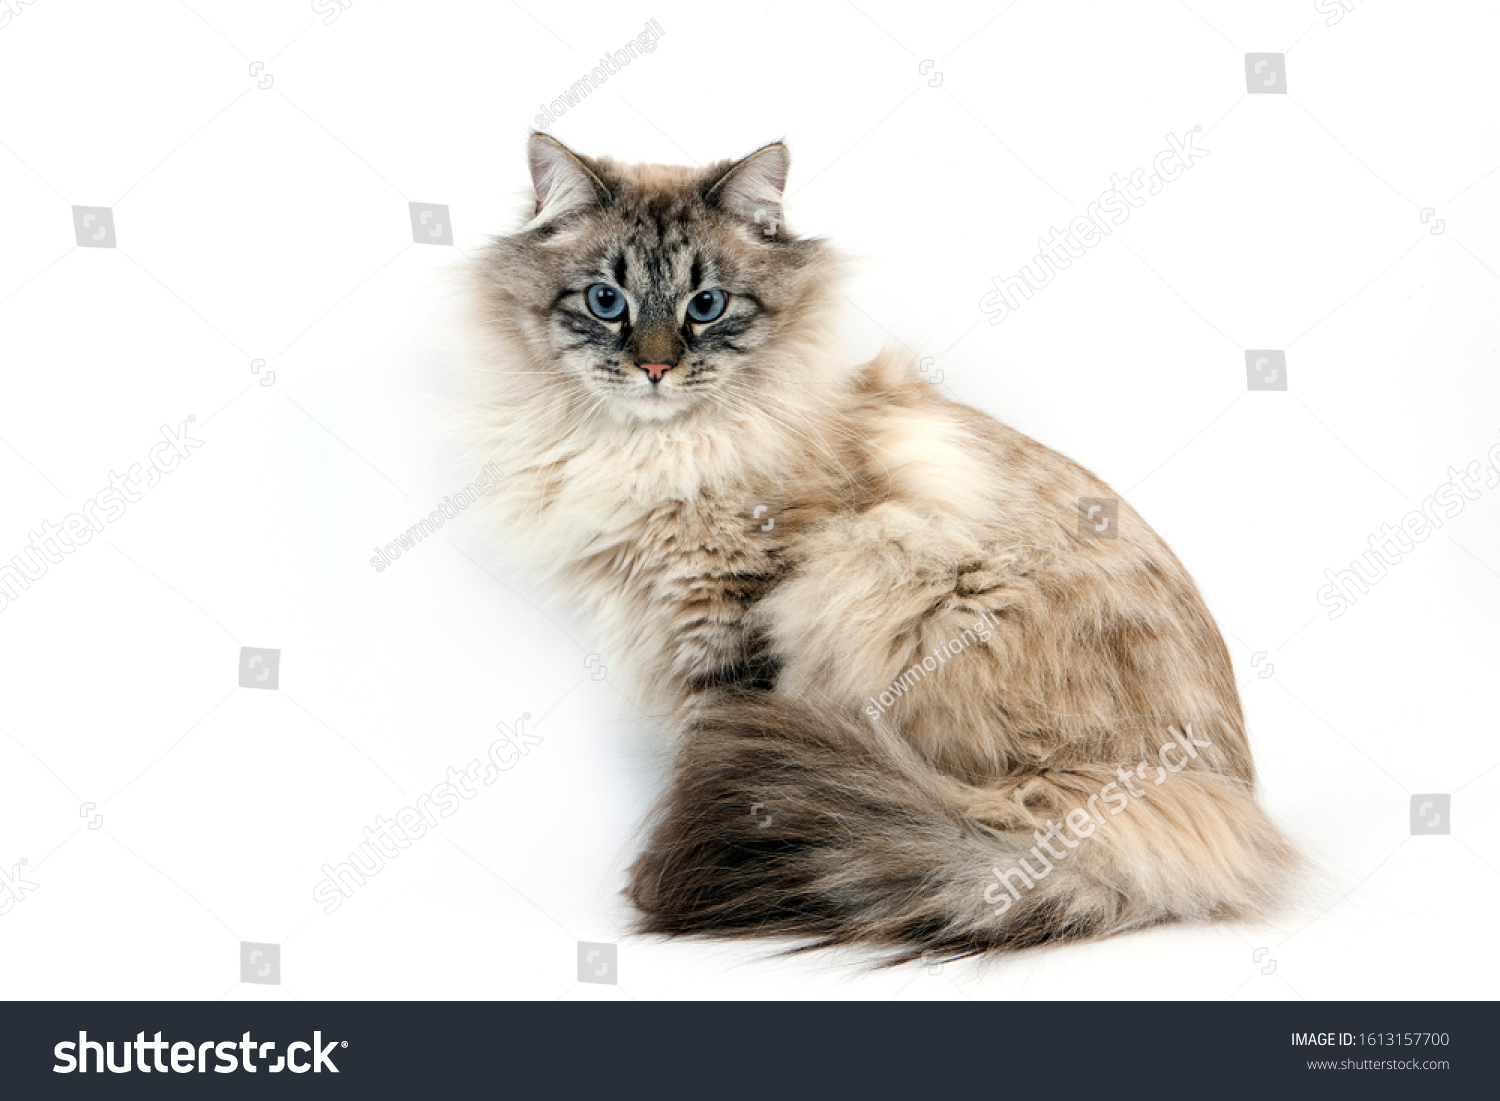 NEVA MASQUERADE SIBERIAN CAT, COLOR SEAL TABBY POINT, MALE AGAINST WHITE BACKGROUND   #1613157700